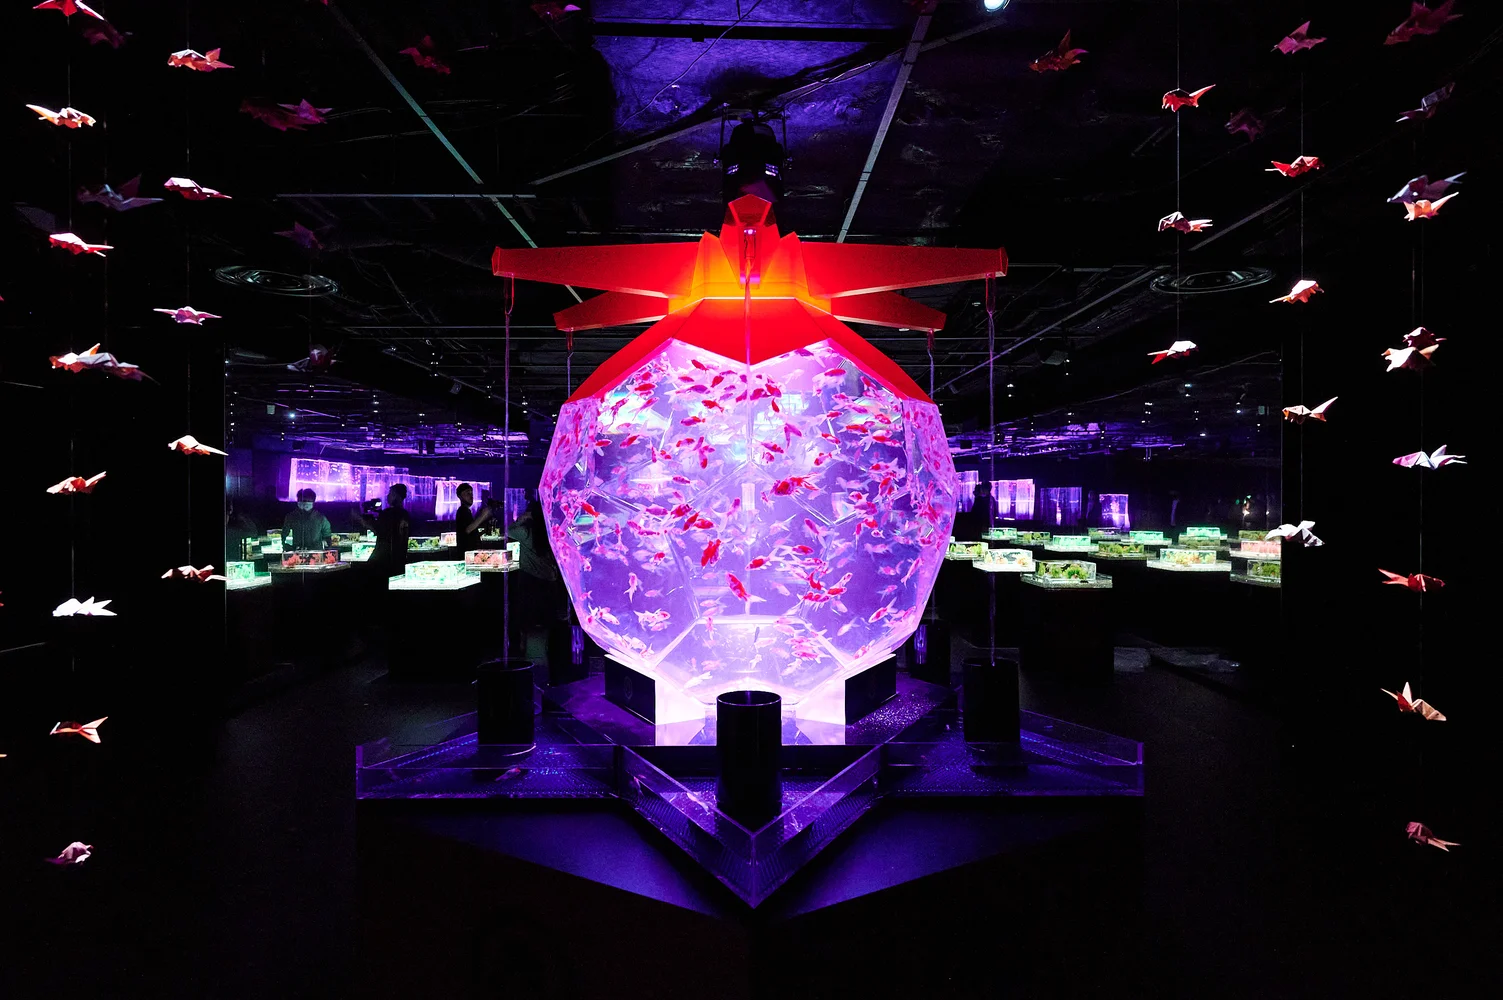 A huge aquarium called "Origamirium" , which inspired by a Japanese traditional paper craft "Origami".